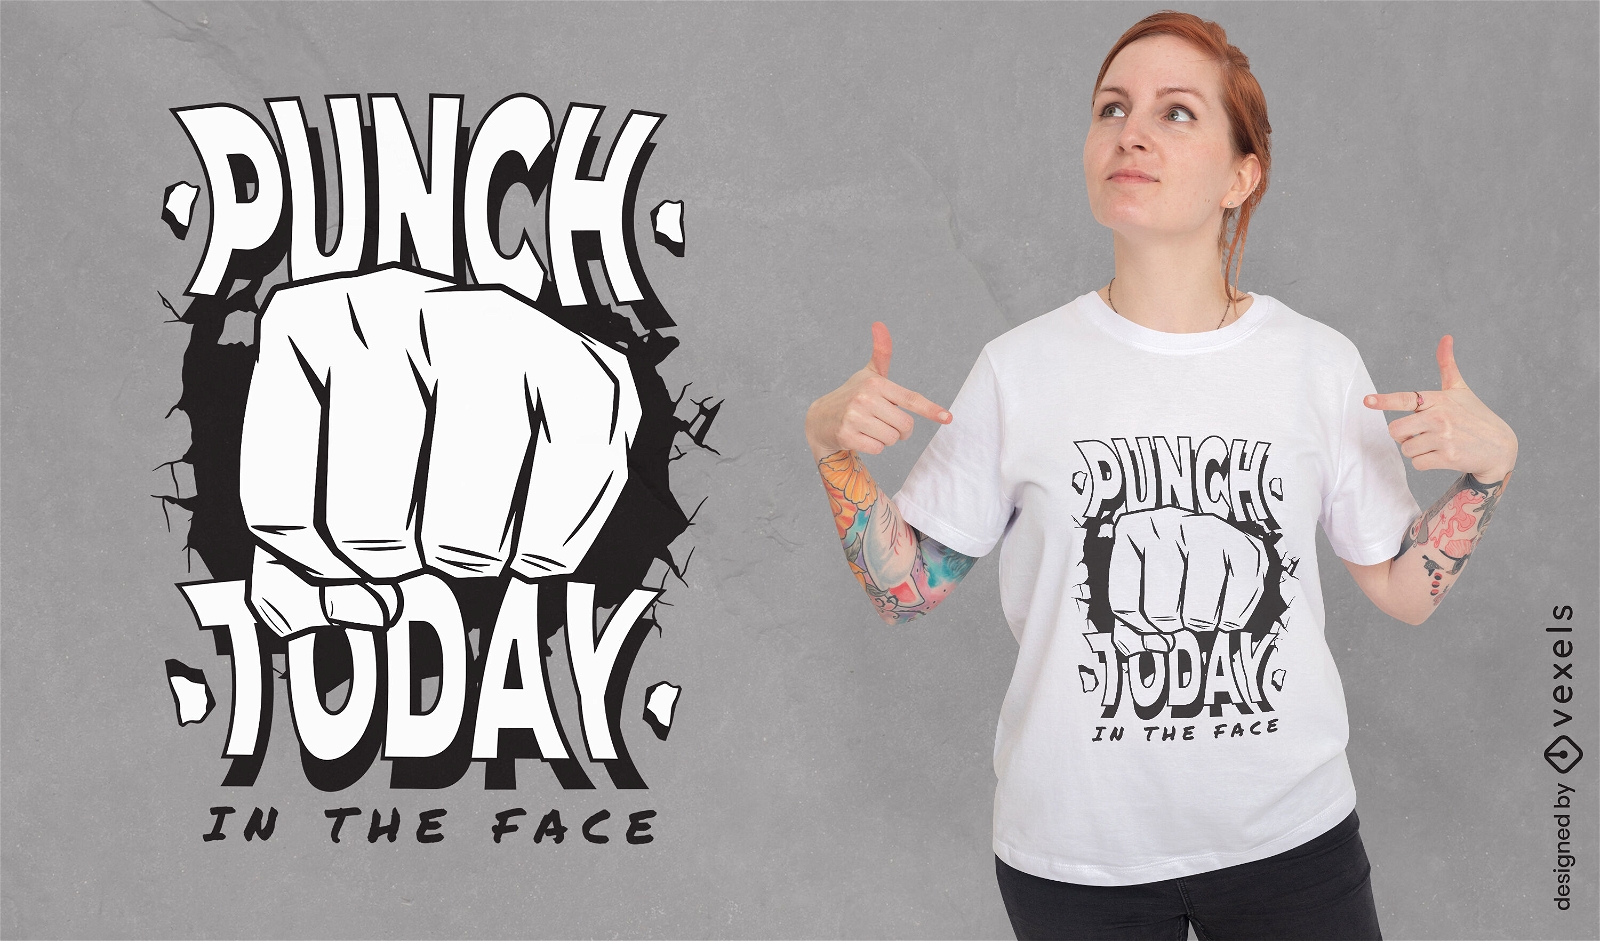 Punch today in the face motivational quote t-shirt design